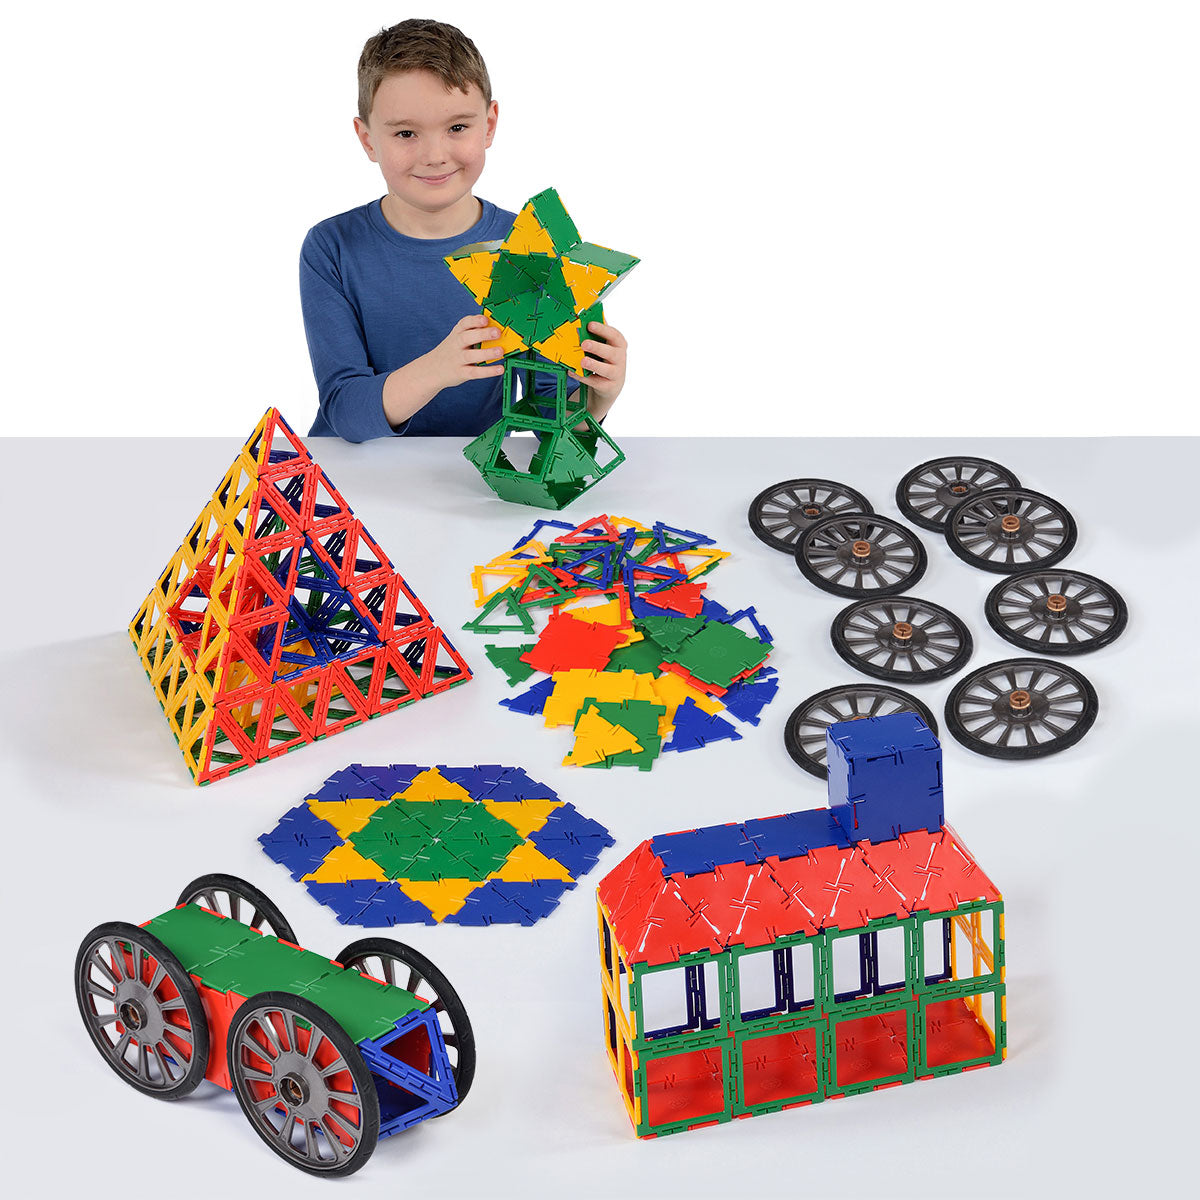 Polydron Super Value Set, The Polydron Super Value Set is the ultimate addition to any classroom, offering an excellent and comprehensive collection of over 450 pieces of Polydron. This set provides exceptional value, offering the most economical way to purchase a bulk set of high-quality Polydron pieces.The Polydron Super Value Set includes a mixture of Original Polydron and Polydron Framework pieces, allowing for a wide range of construction possibilities. With 456 pieces in total, this set contains 80 so